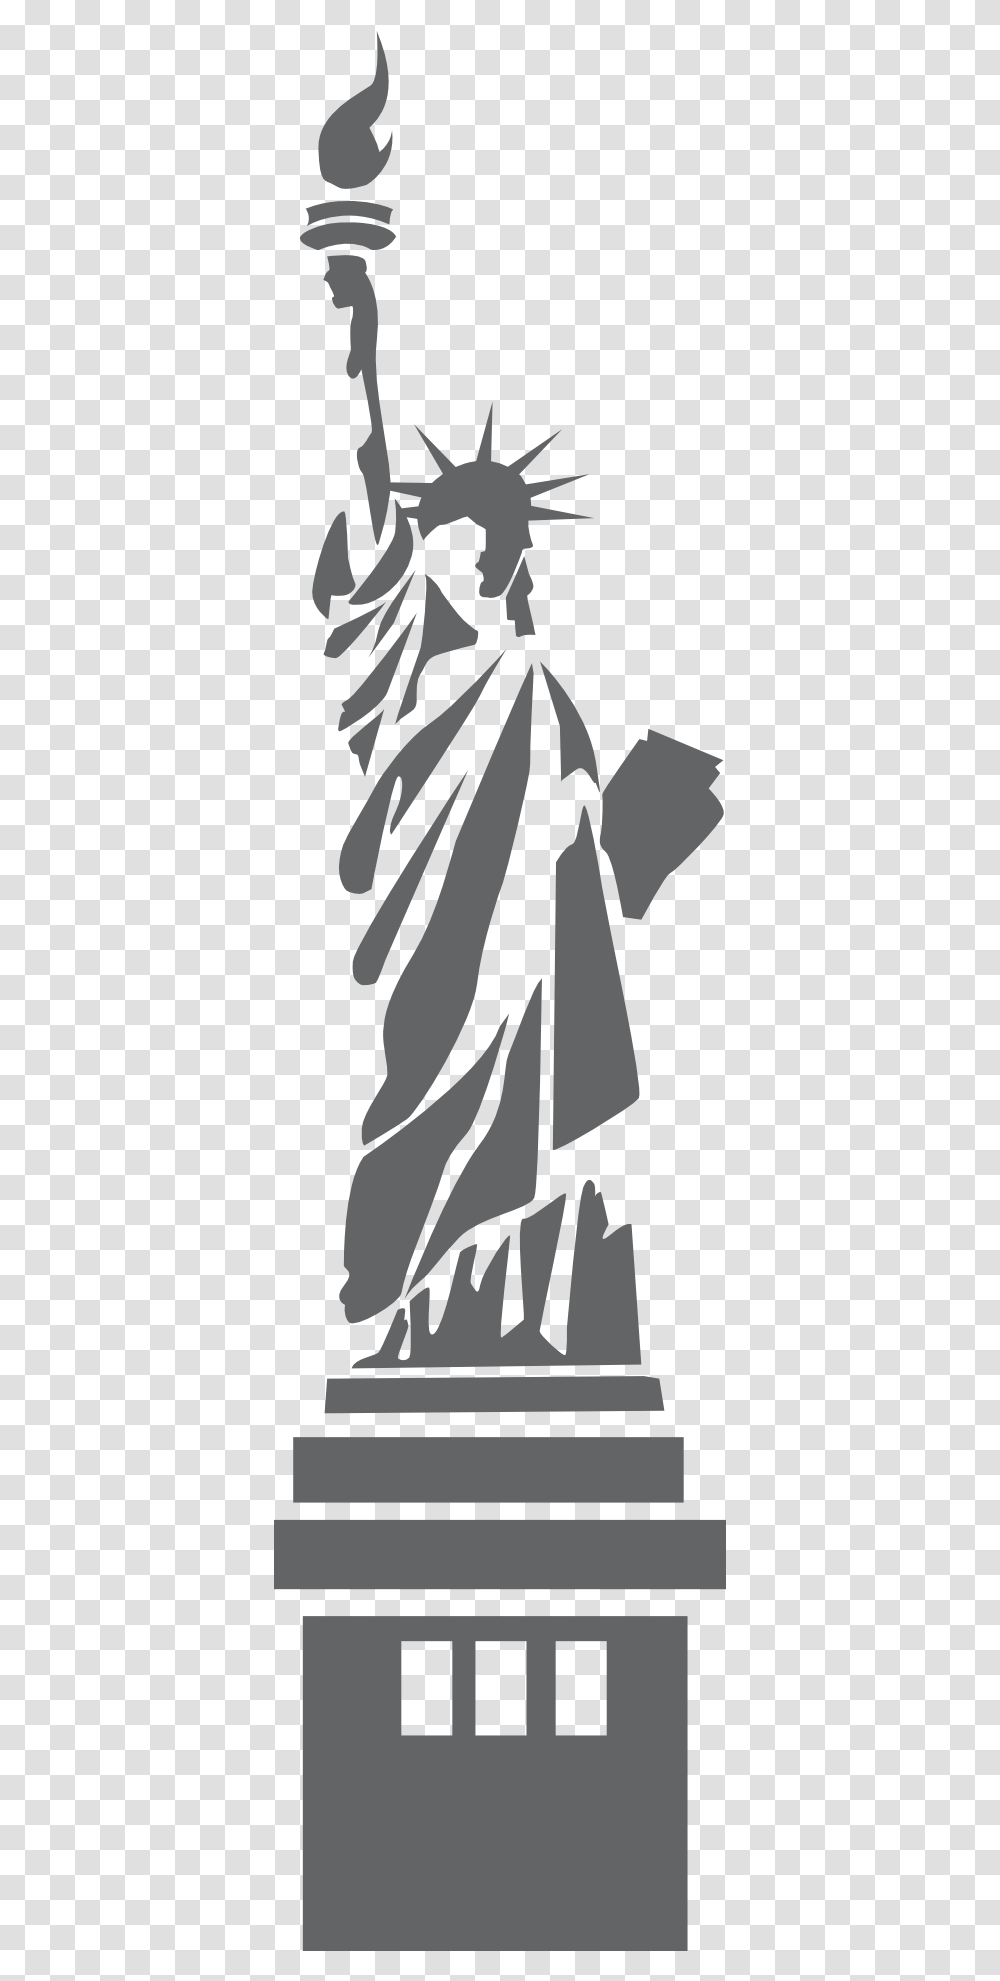 The Statue Of Liberty Outline Free Vector Blue Statue Of Liberty, Apparel, Fashion, Robe Transparent Png